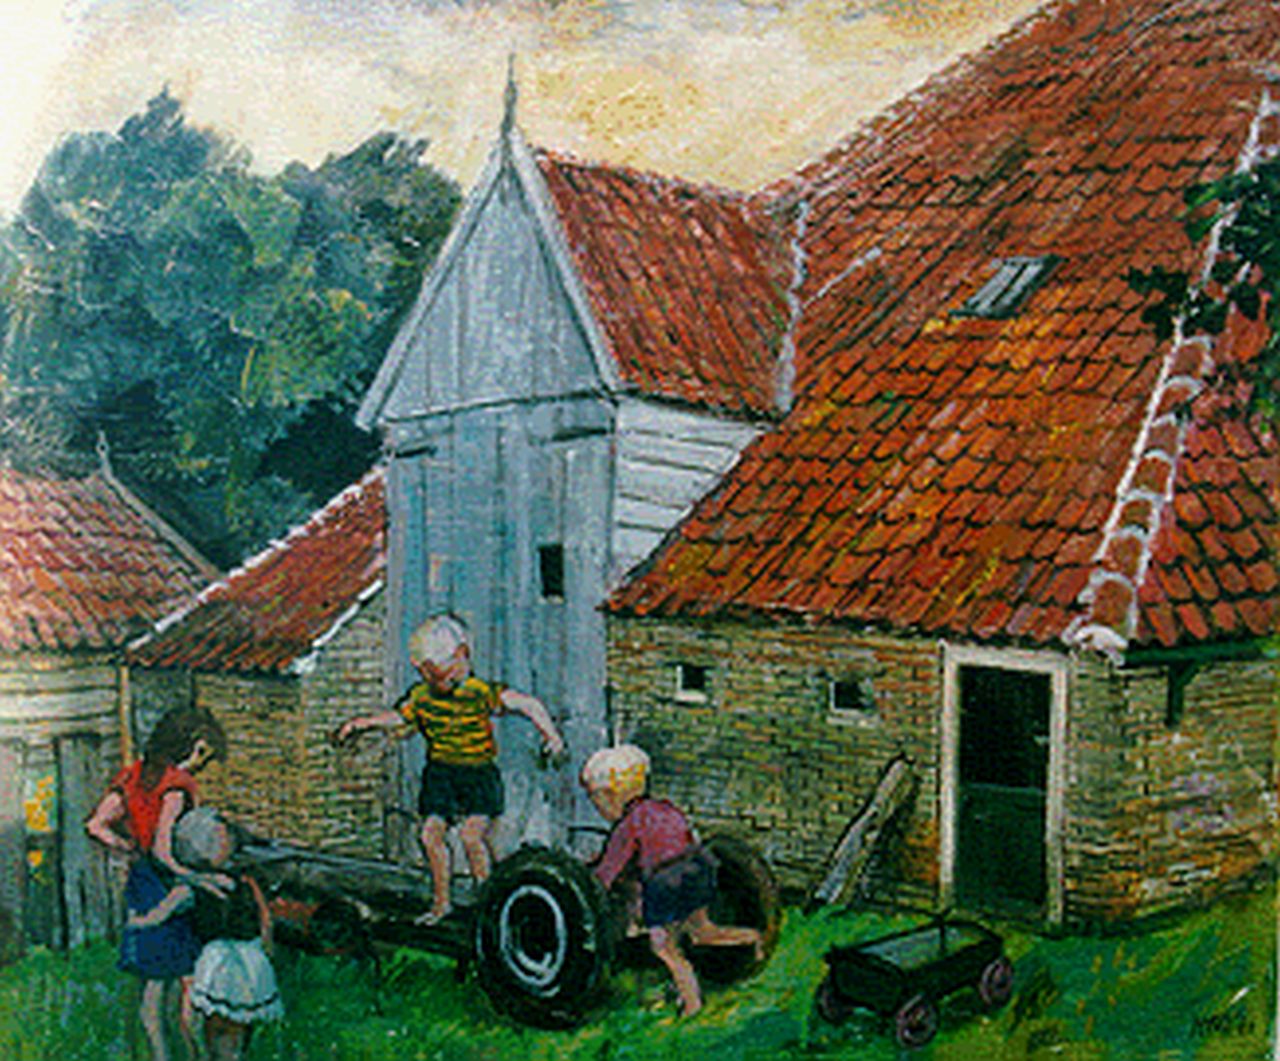 Kamerlingh Onnes H.H.  | 'Harm' Henrick Kamerlingh Onnes, Children playing on a yard, Terschelling, oil on canvas 50.3 x 60.2 cm, signed l.r. with monogram and dated '60